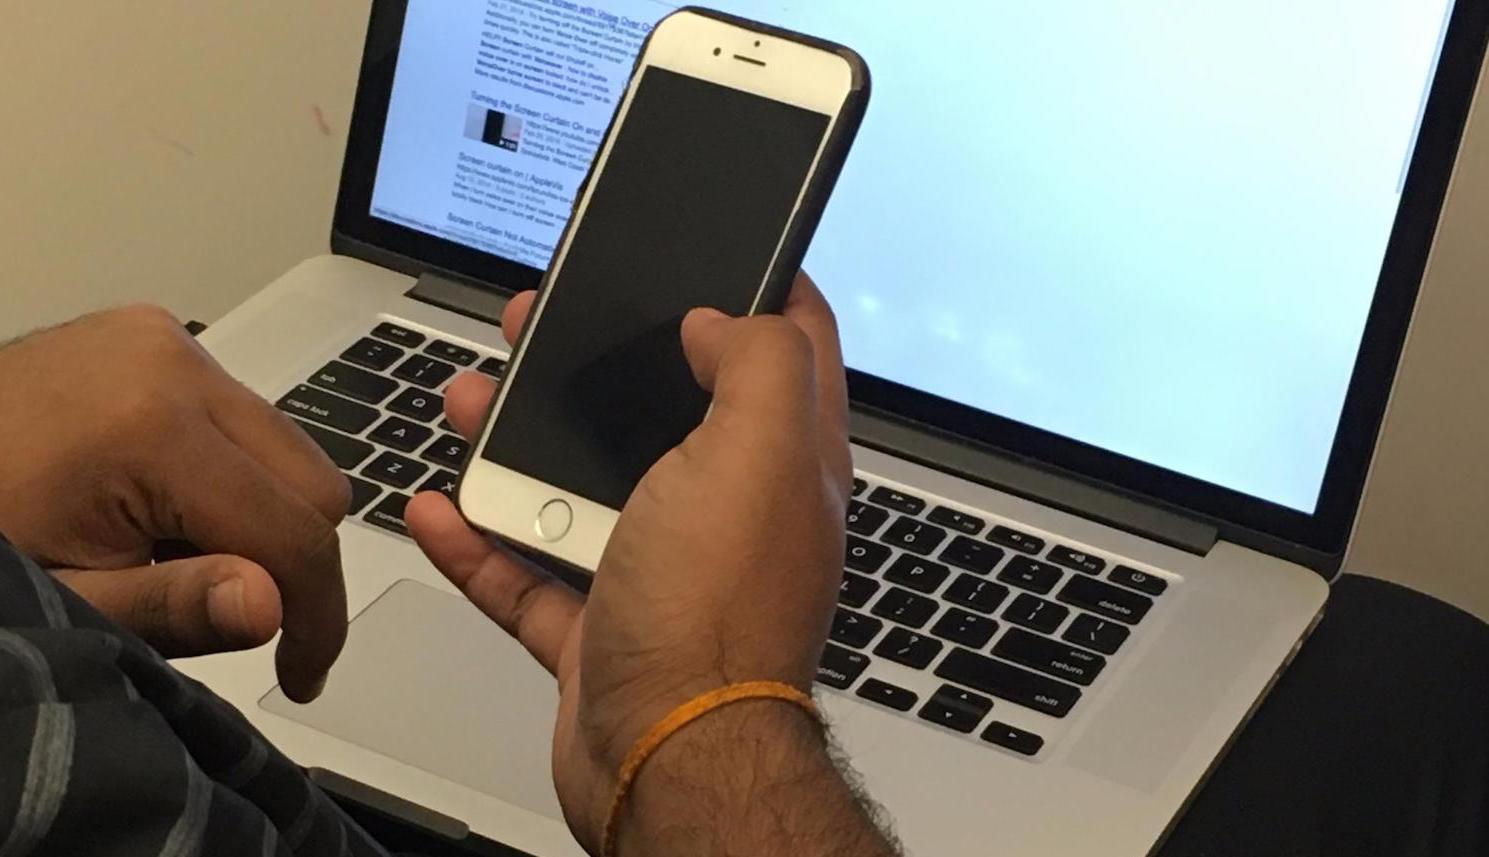 A male hand is holding an iPhone with a black screen in front of an open laptop.